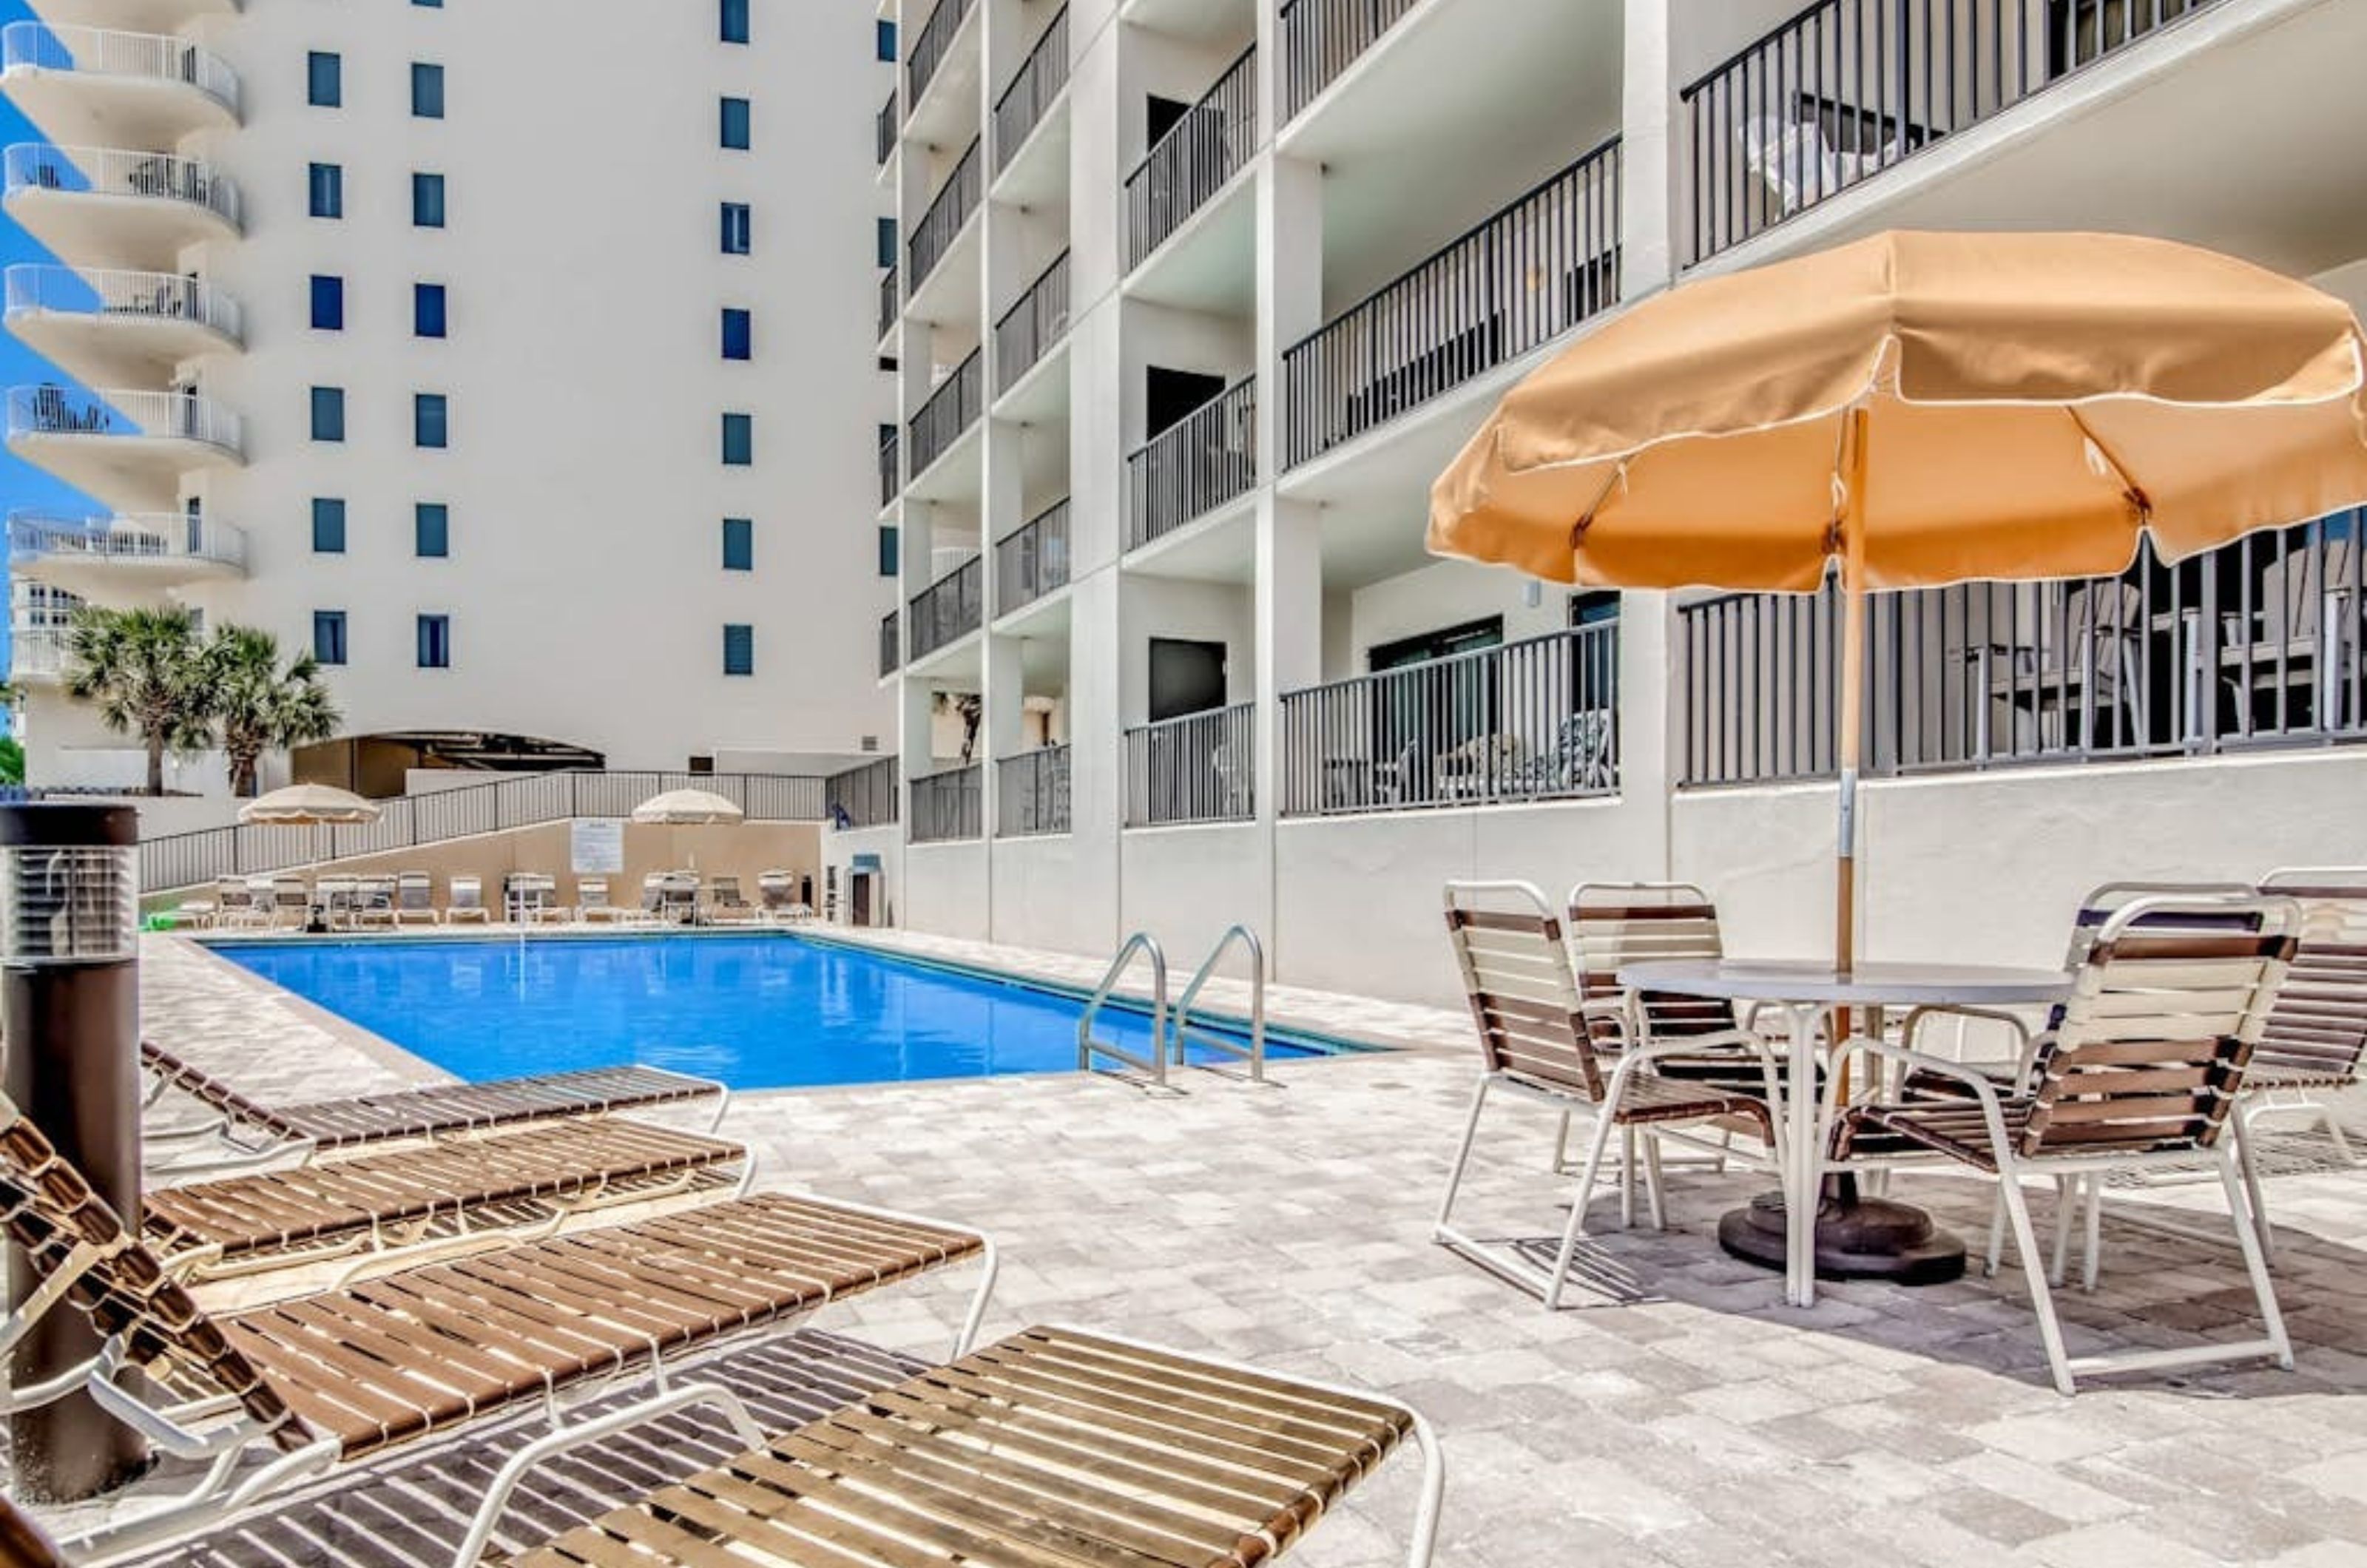 Lounge chairs and umbrellas next to the outdoor swimming pool at the Palms in Orange Beach Alabama 